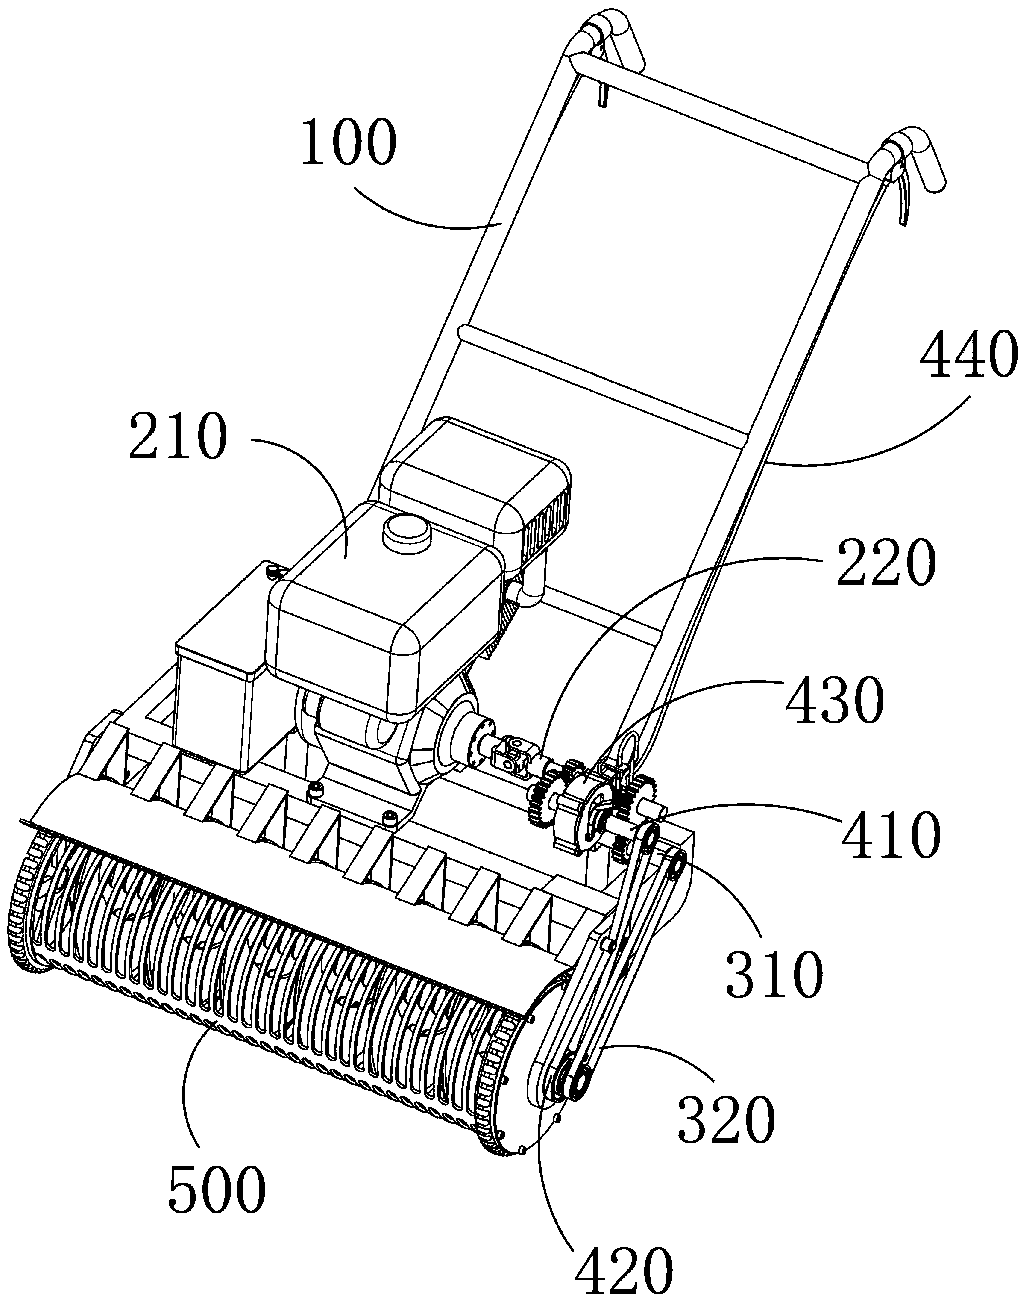 Clutch device for controlling travel of vehicle